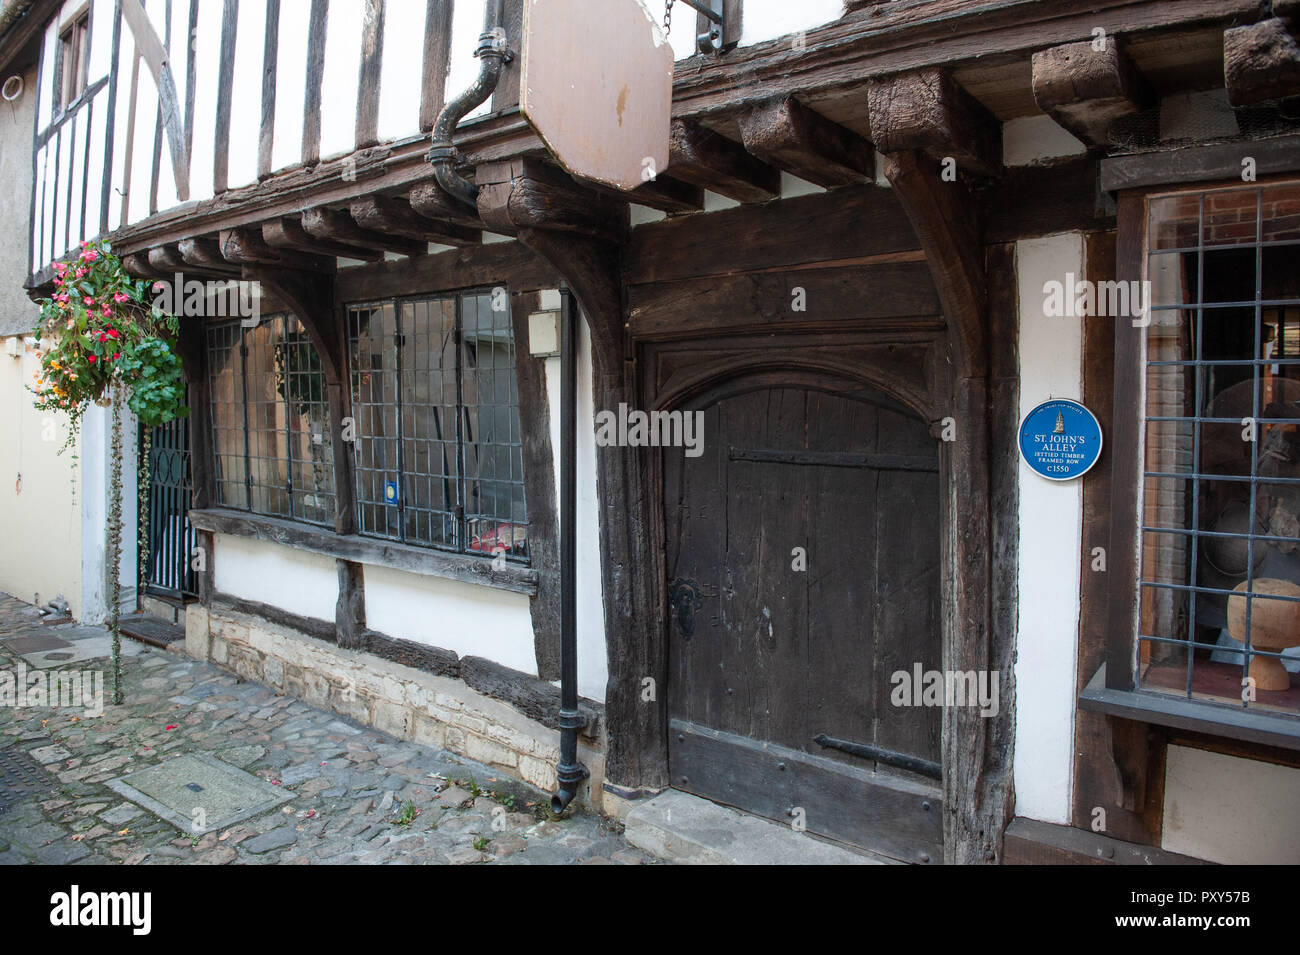 15th Century buildings in St John's Alley, Devizes, Wiltshire, UK. Stock Photo